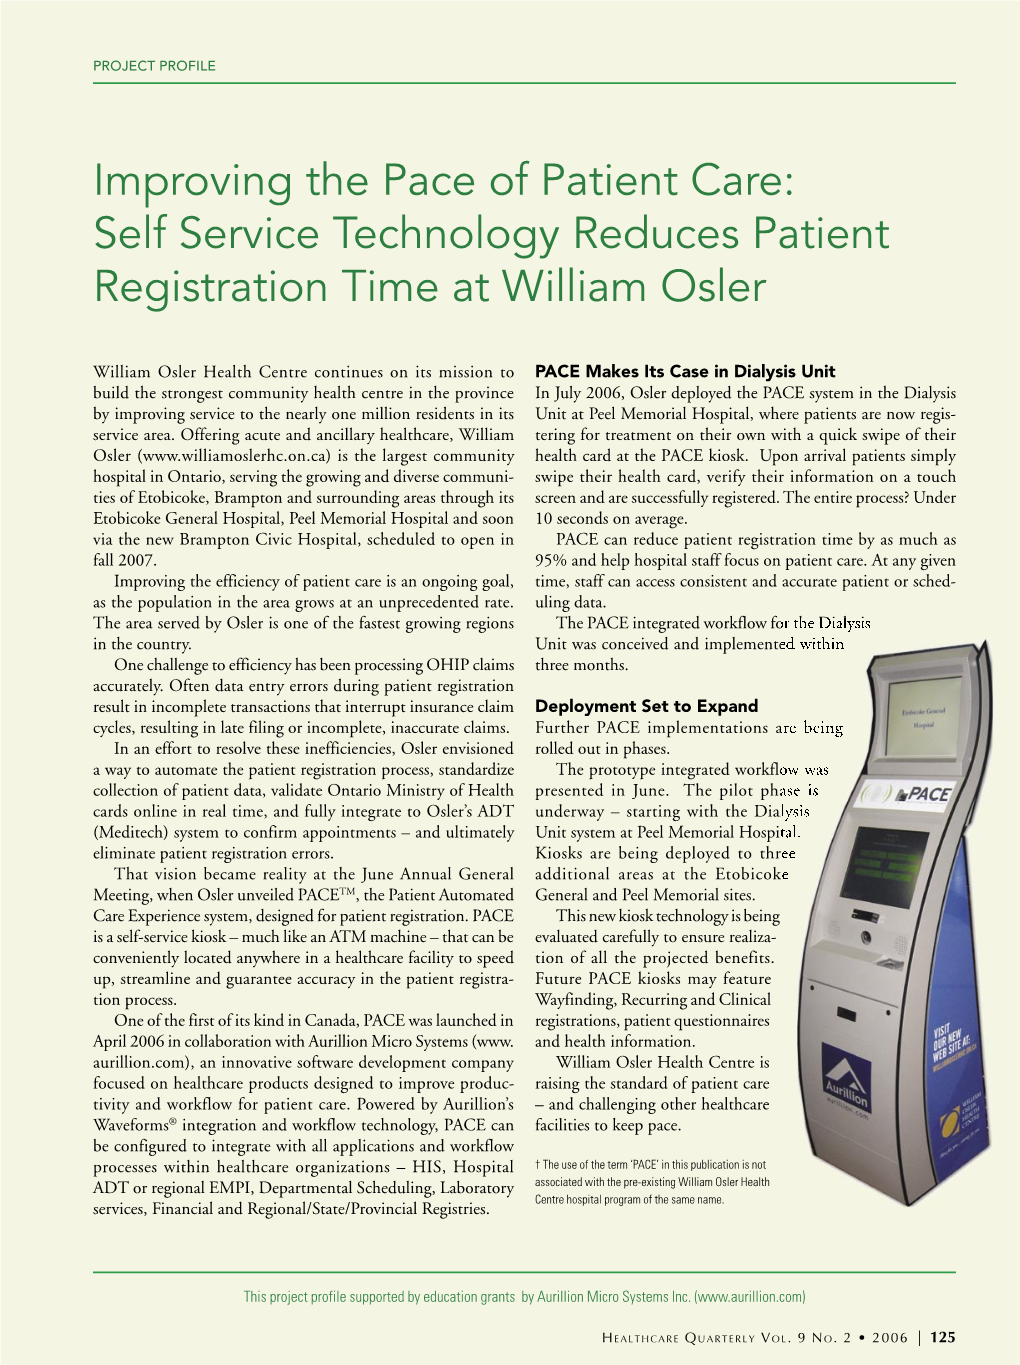 Improving the Pace of Patient Care: Self Service Technology Reduces Patient Registration Time at William Osler